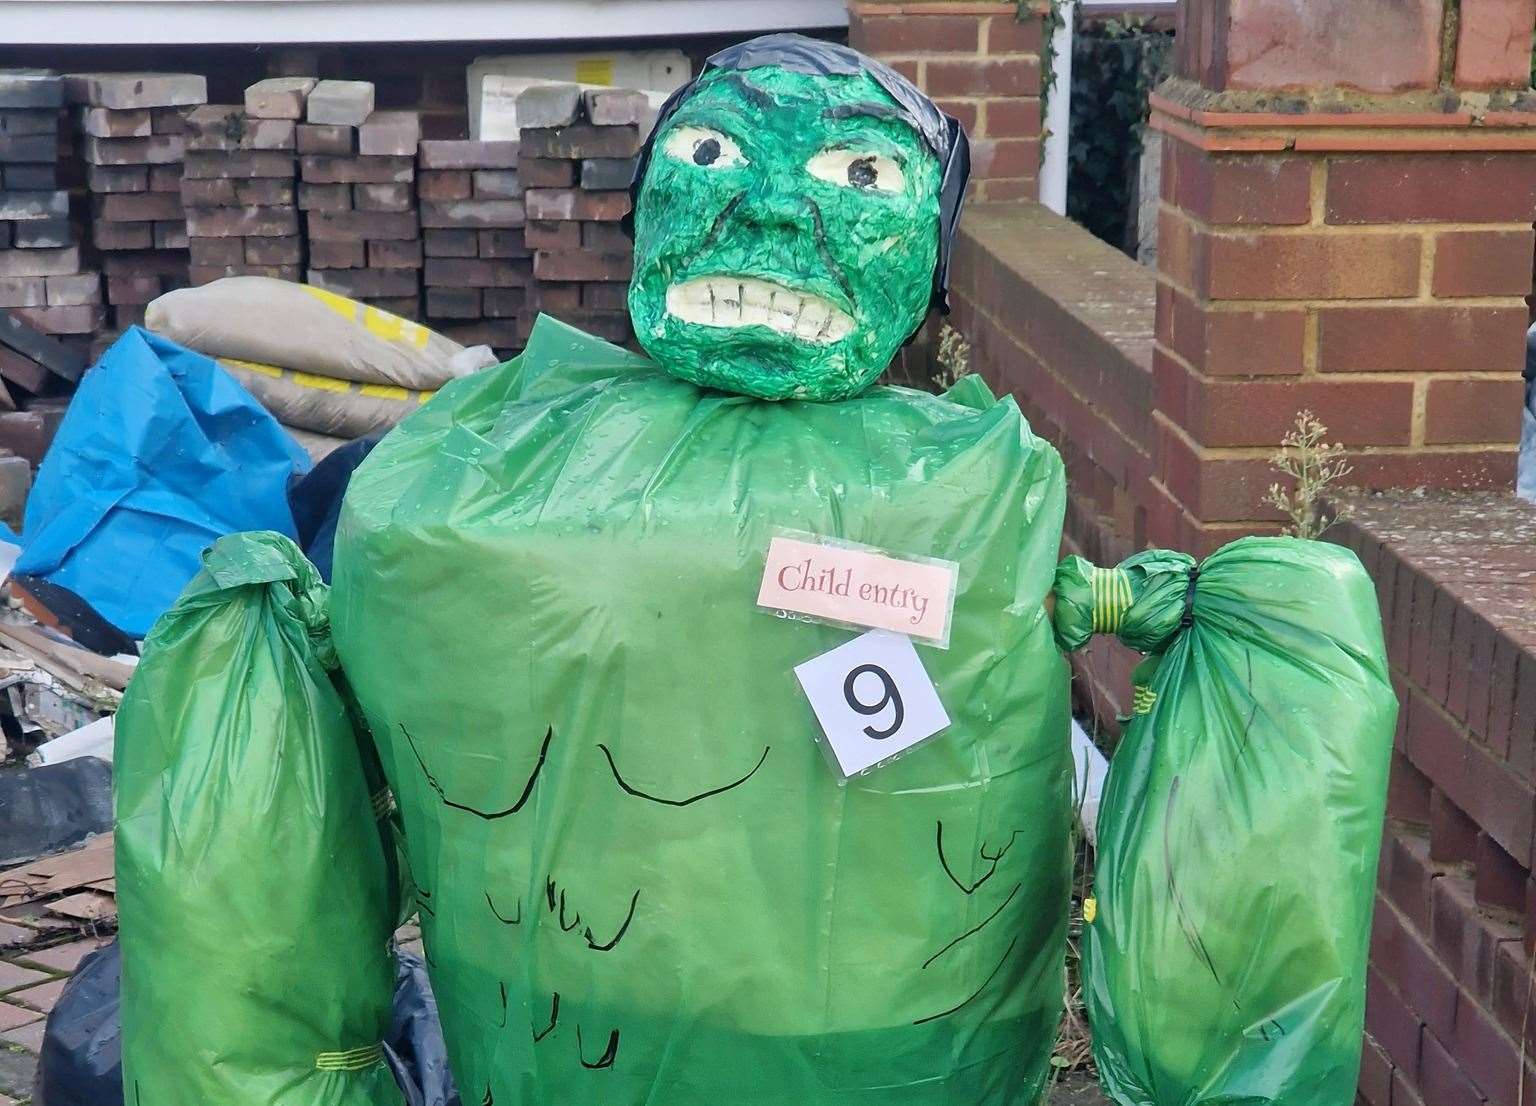 The Hulk is among the scarecrows on display